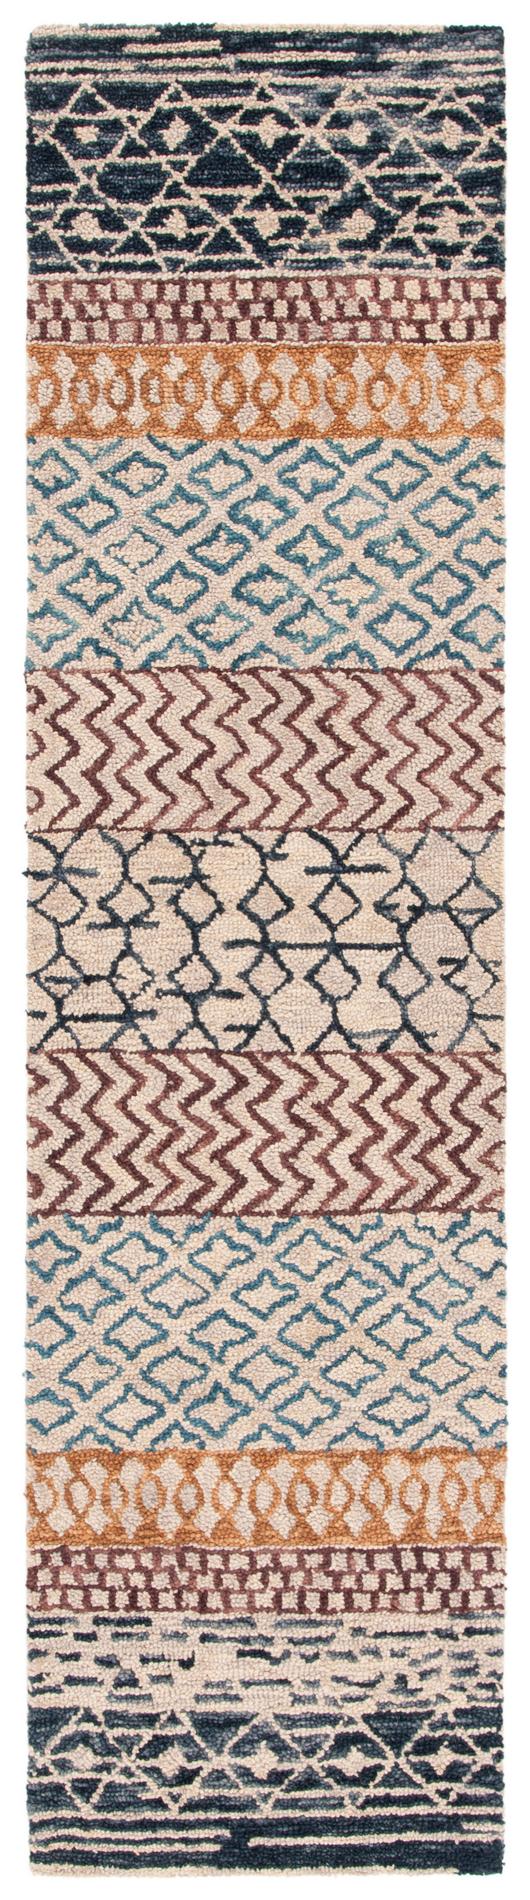 Safavieh Capri Cpr502A Ivory/Charcoal Area Rug